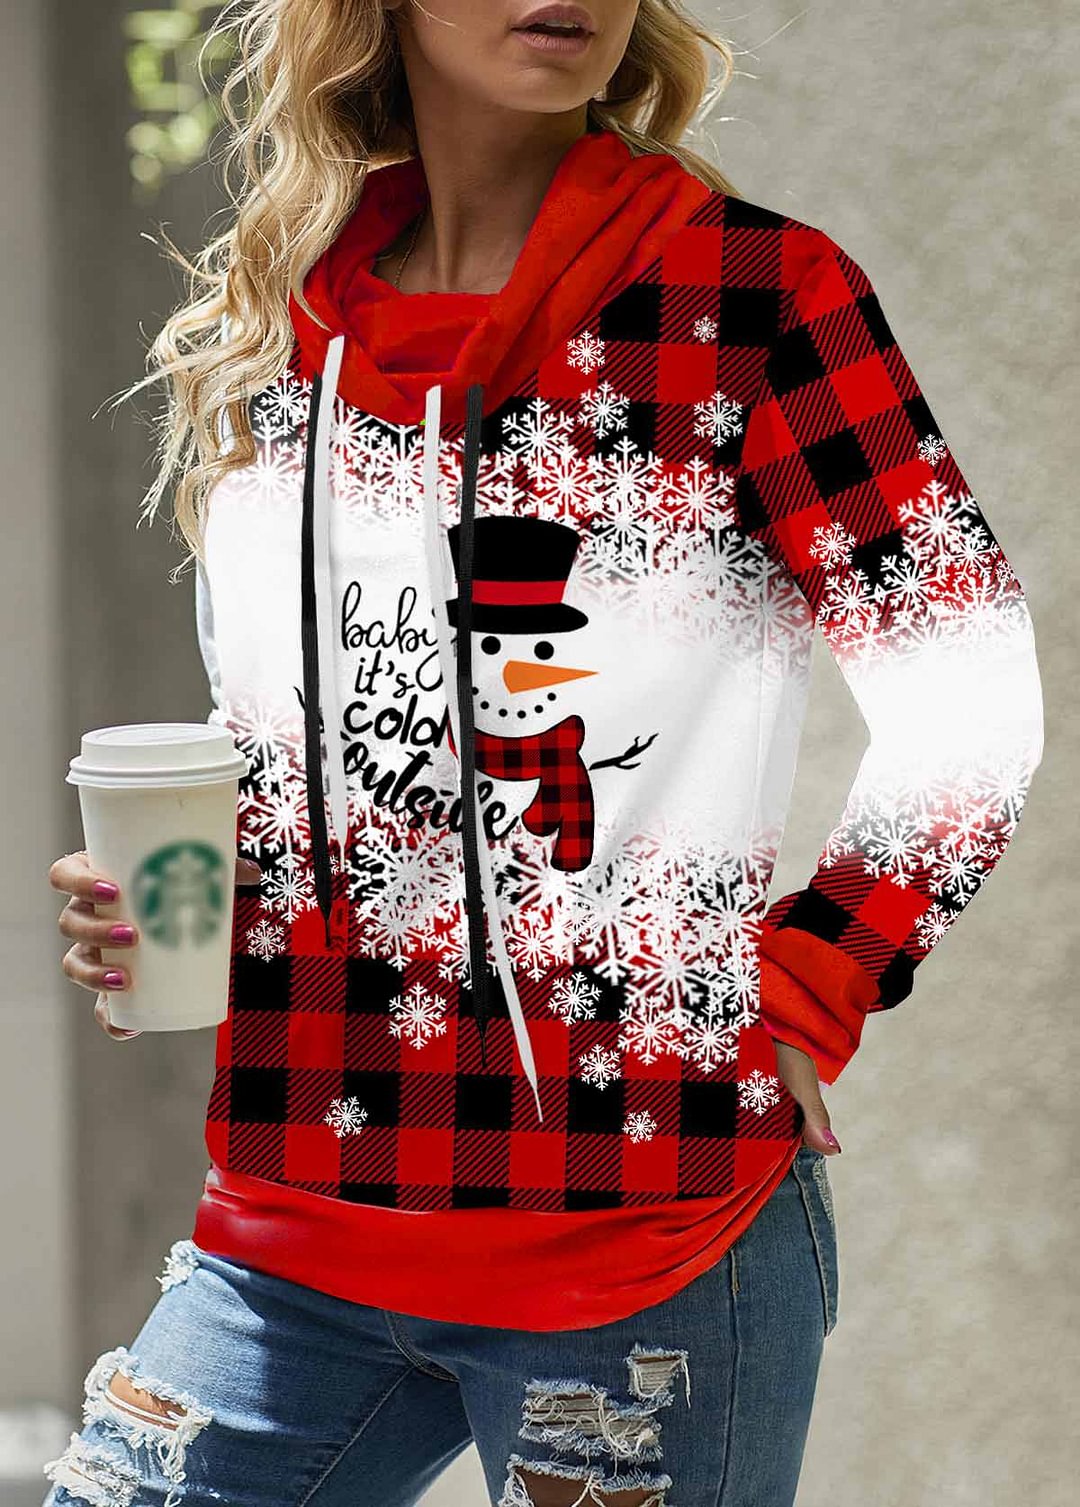 Baby It's Cold Outside Printed Women's Casual Sweatshirt